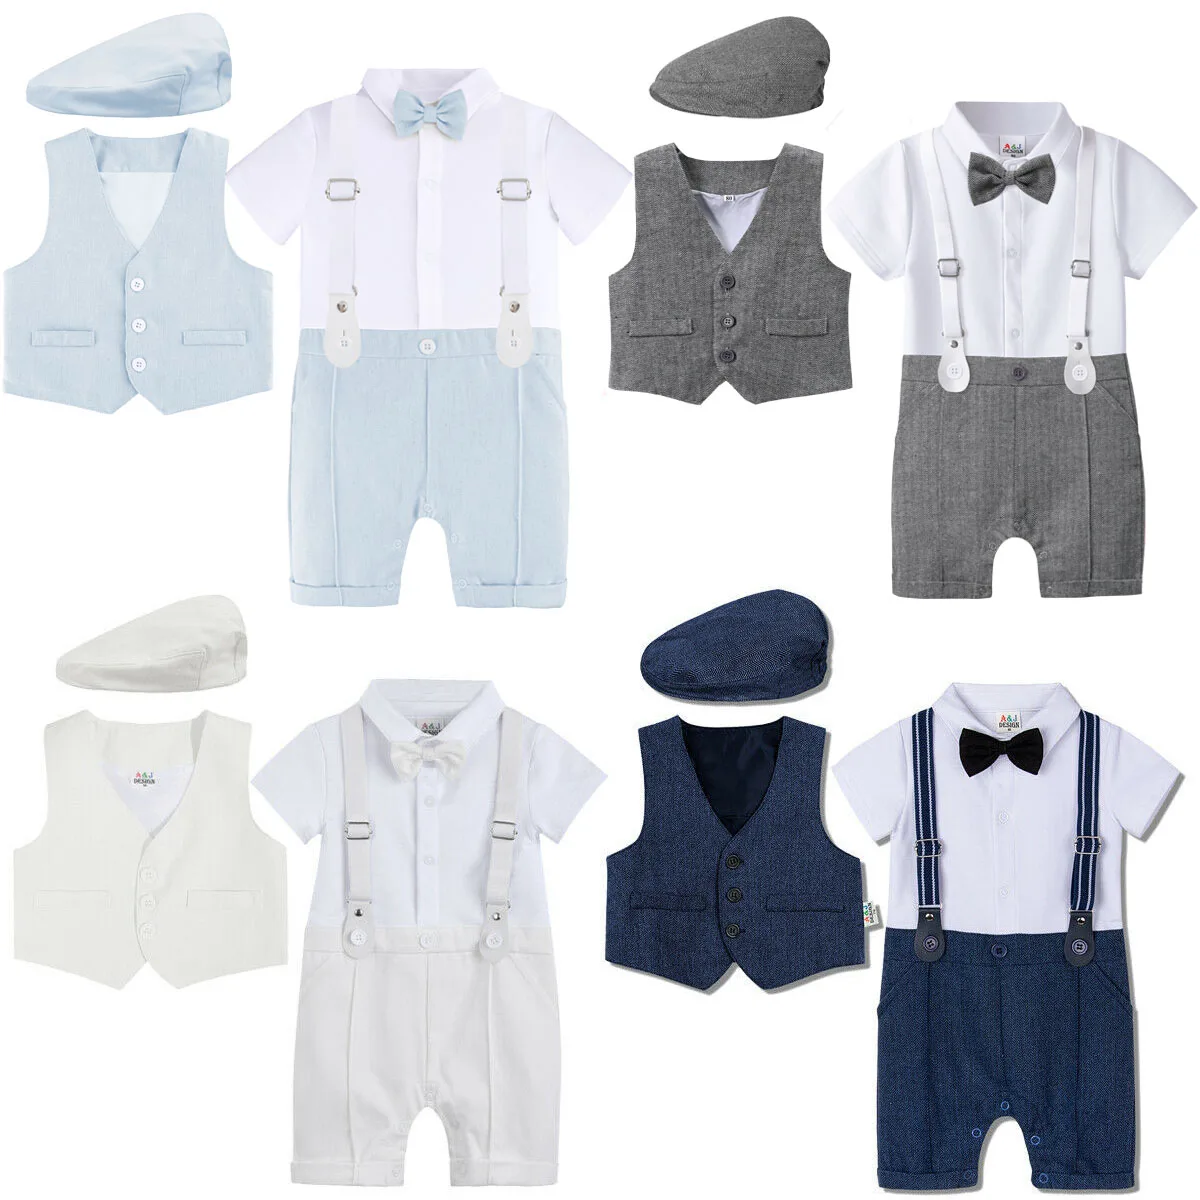 

Newborn Boys Clothing Set Baby Christening Outfit Romper Infant Wedding Birthday Party Formal Overalls Gentleman Costumes